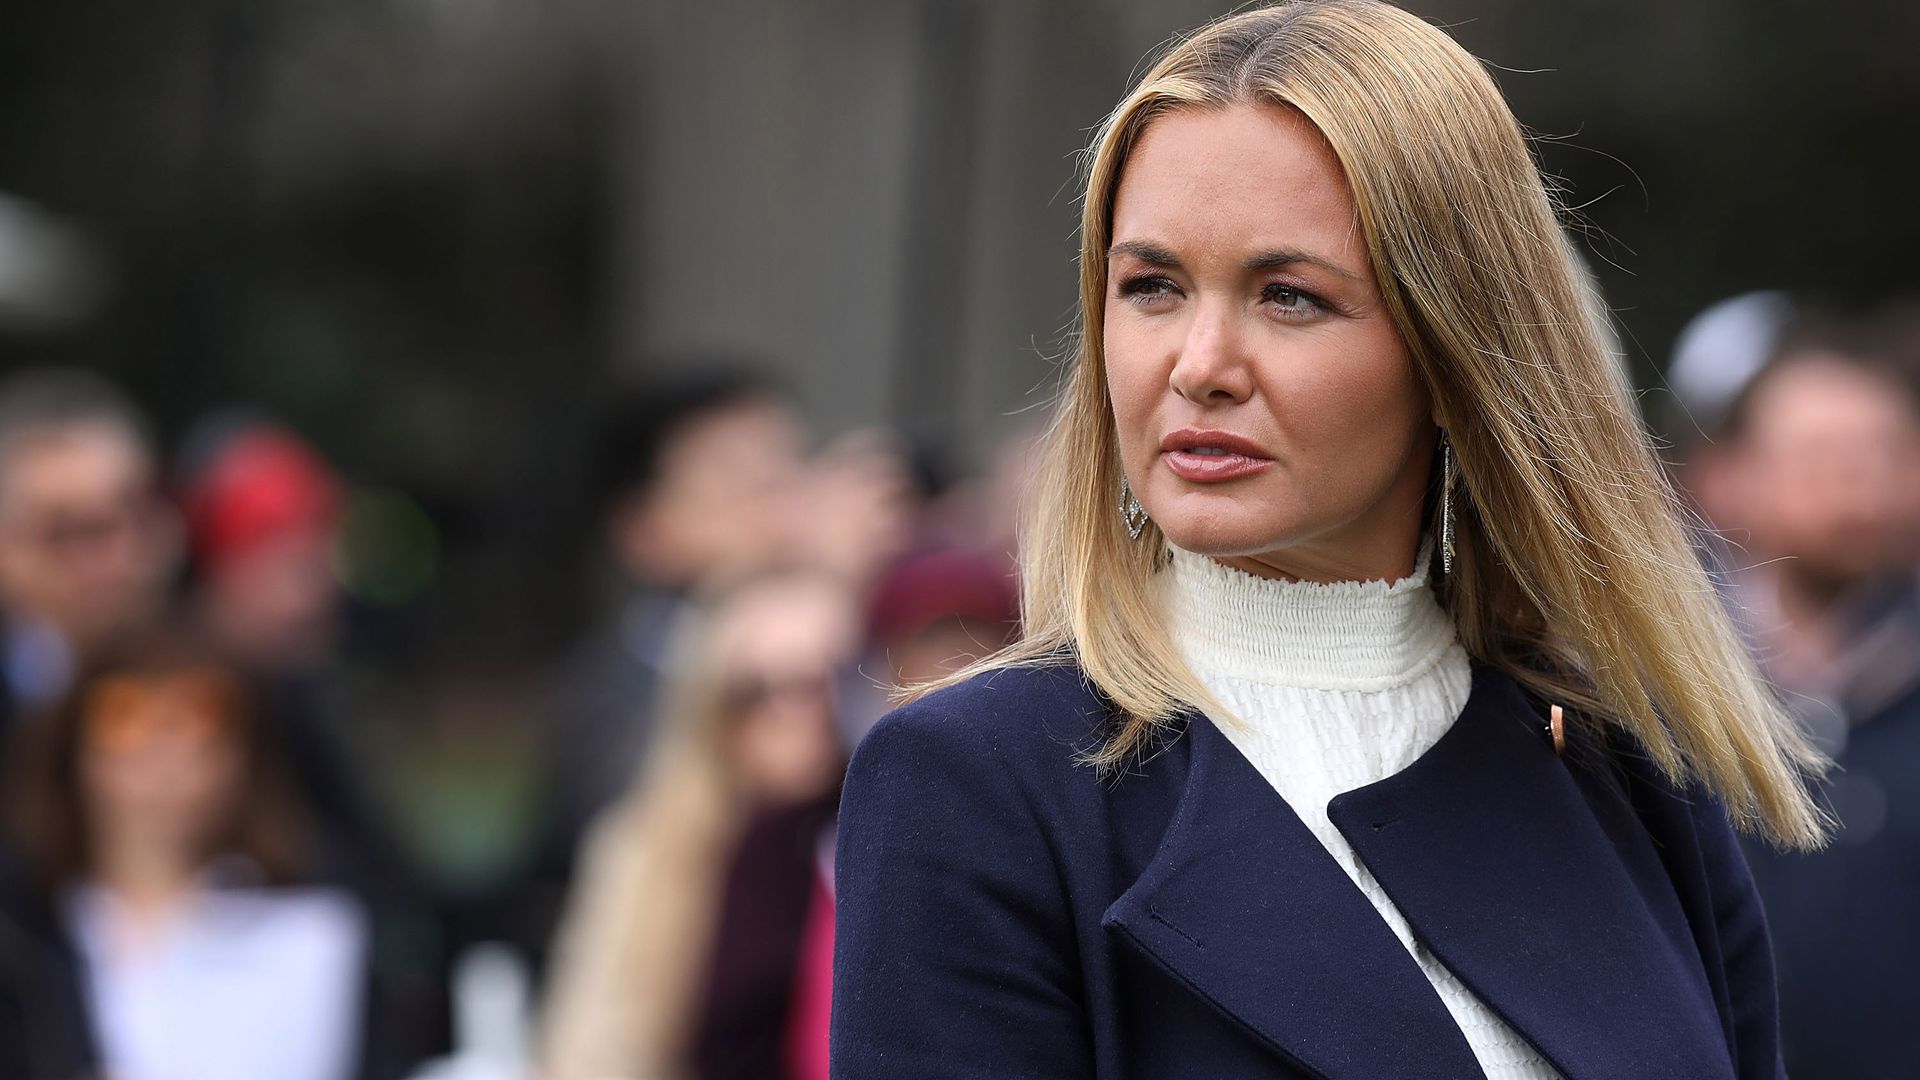 Vanessa Trump was opened an envelope filled with white powder.